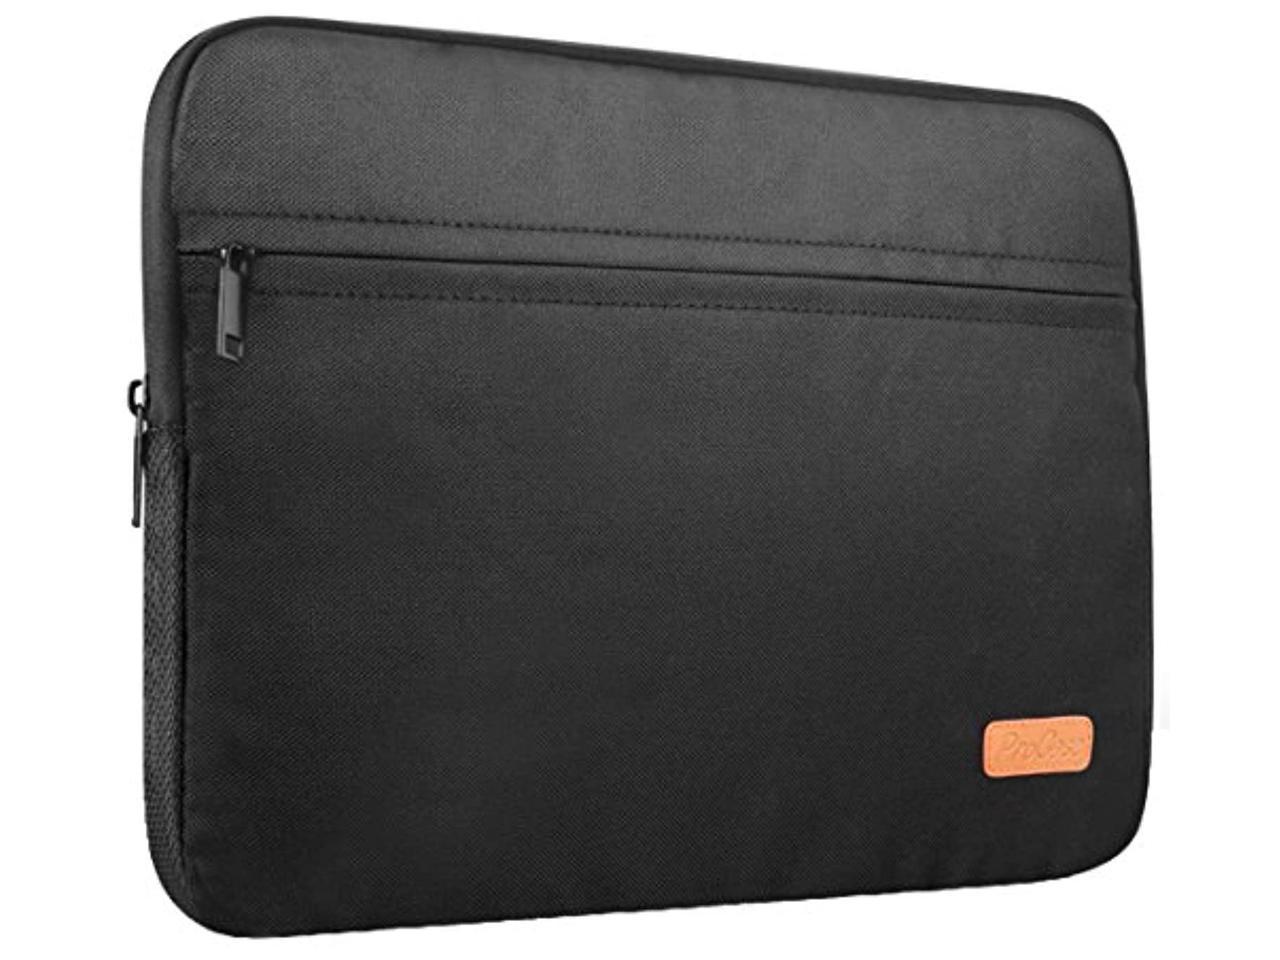 iPad Pro Protective Carrying Cover Handbag for 11 12 Lenovo Dell Toshiba HP ASUS Acer Chromebook ProCase 12-12.9 inch Sleeve Case Bag for Surface Pro 2017/Pro 6 4 3 Darkblue MacBook Pro 13 